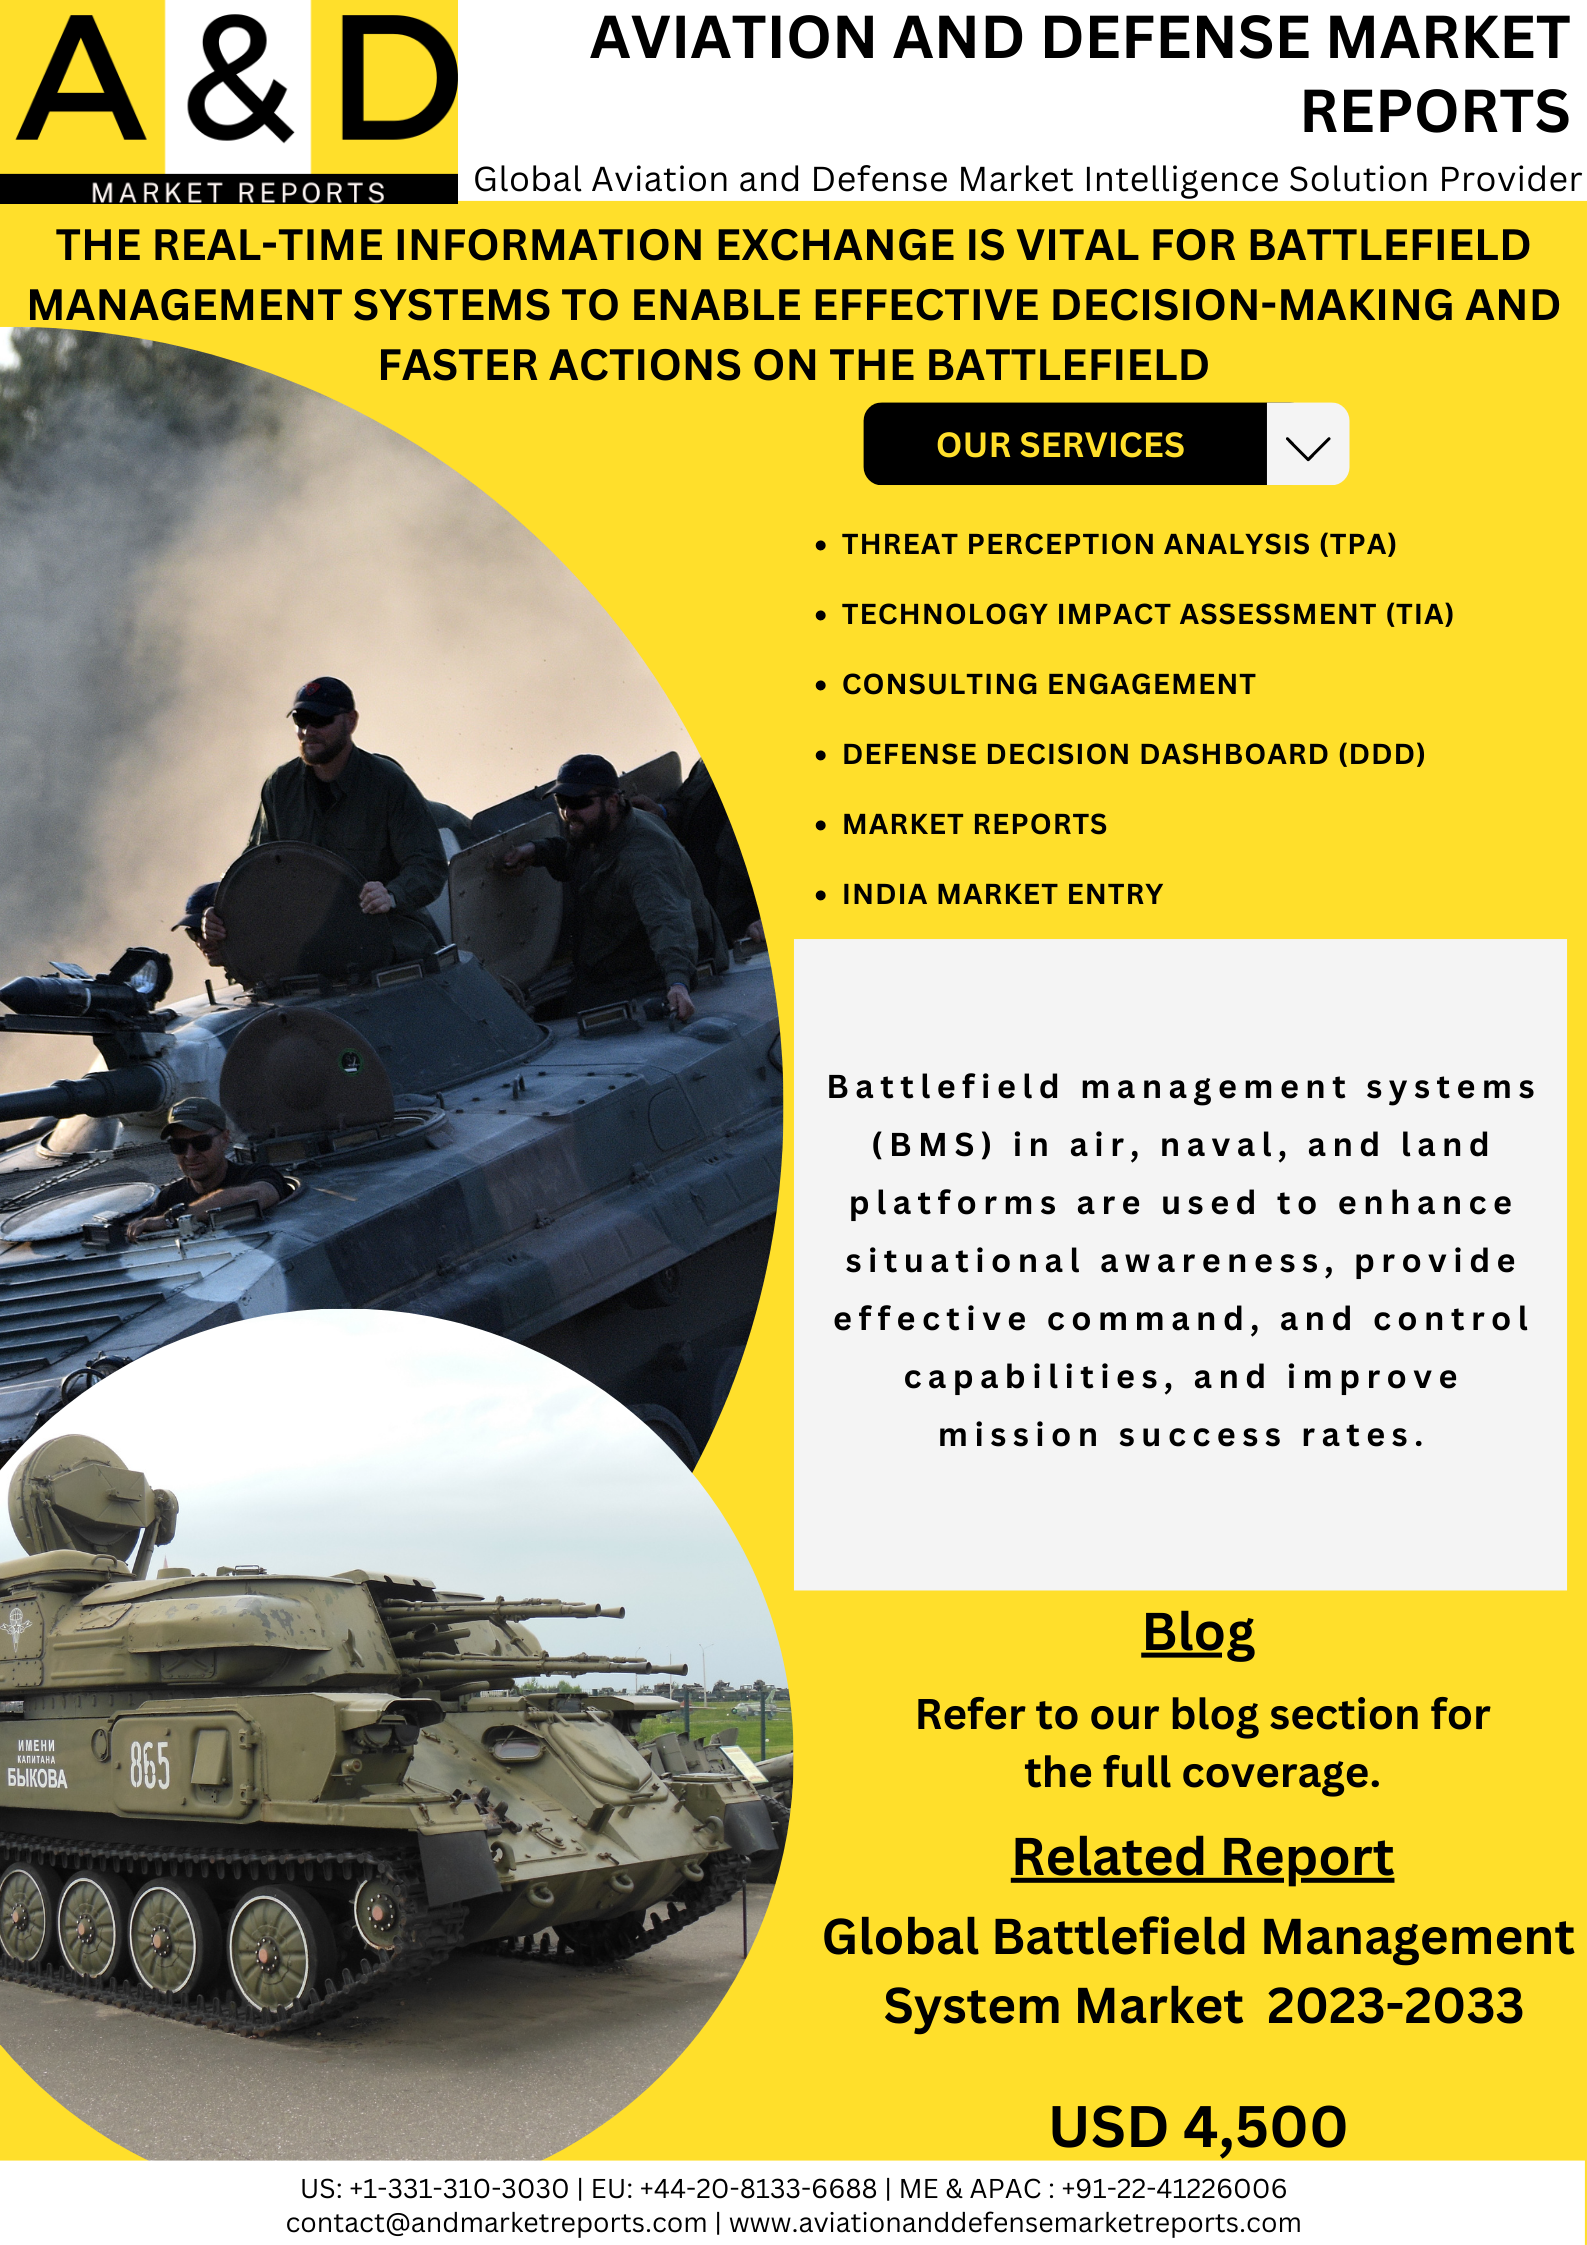 THE REAL-TIME INFORMATION EXCHANGE IS VITAL FOR BATTLEFIELD MANAGEMENT SYSTEMS TO ENABLE EFFECTIVE DECISION-MAKING AND FASTER ACTIONS ON THE BATTLEFIELD